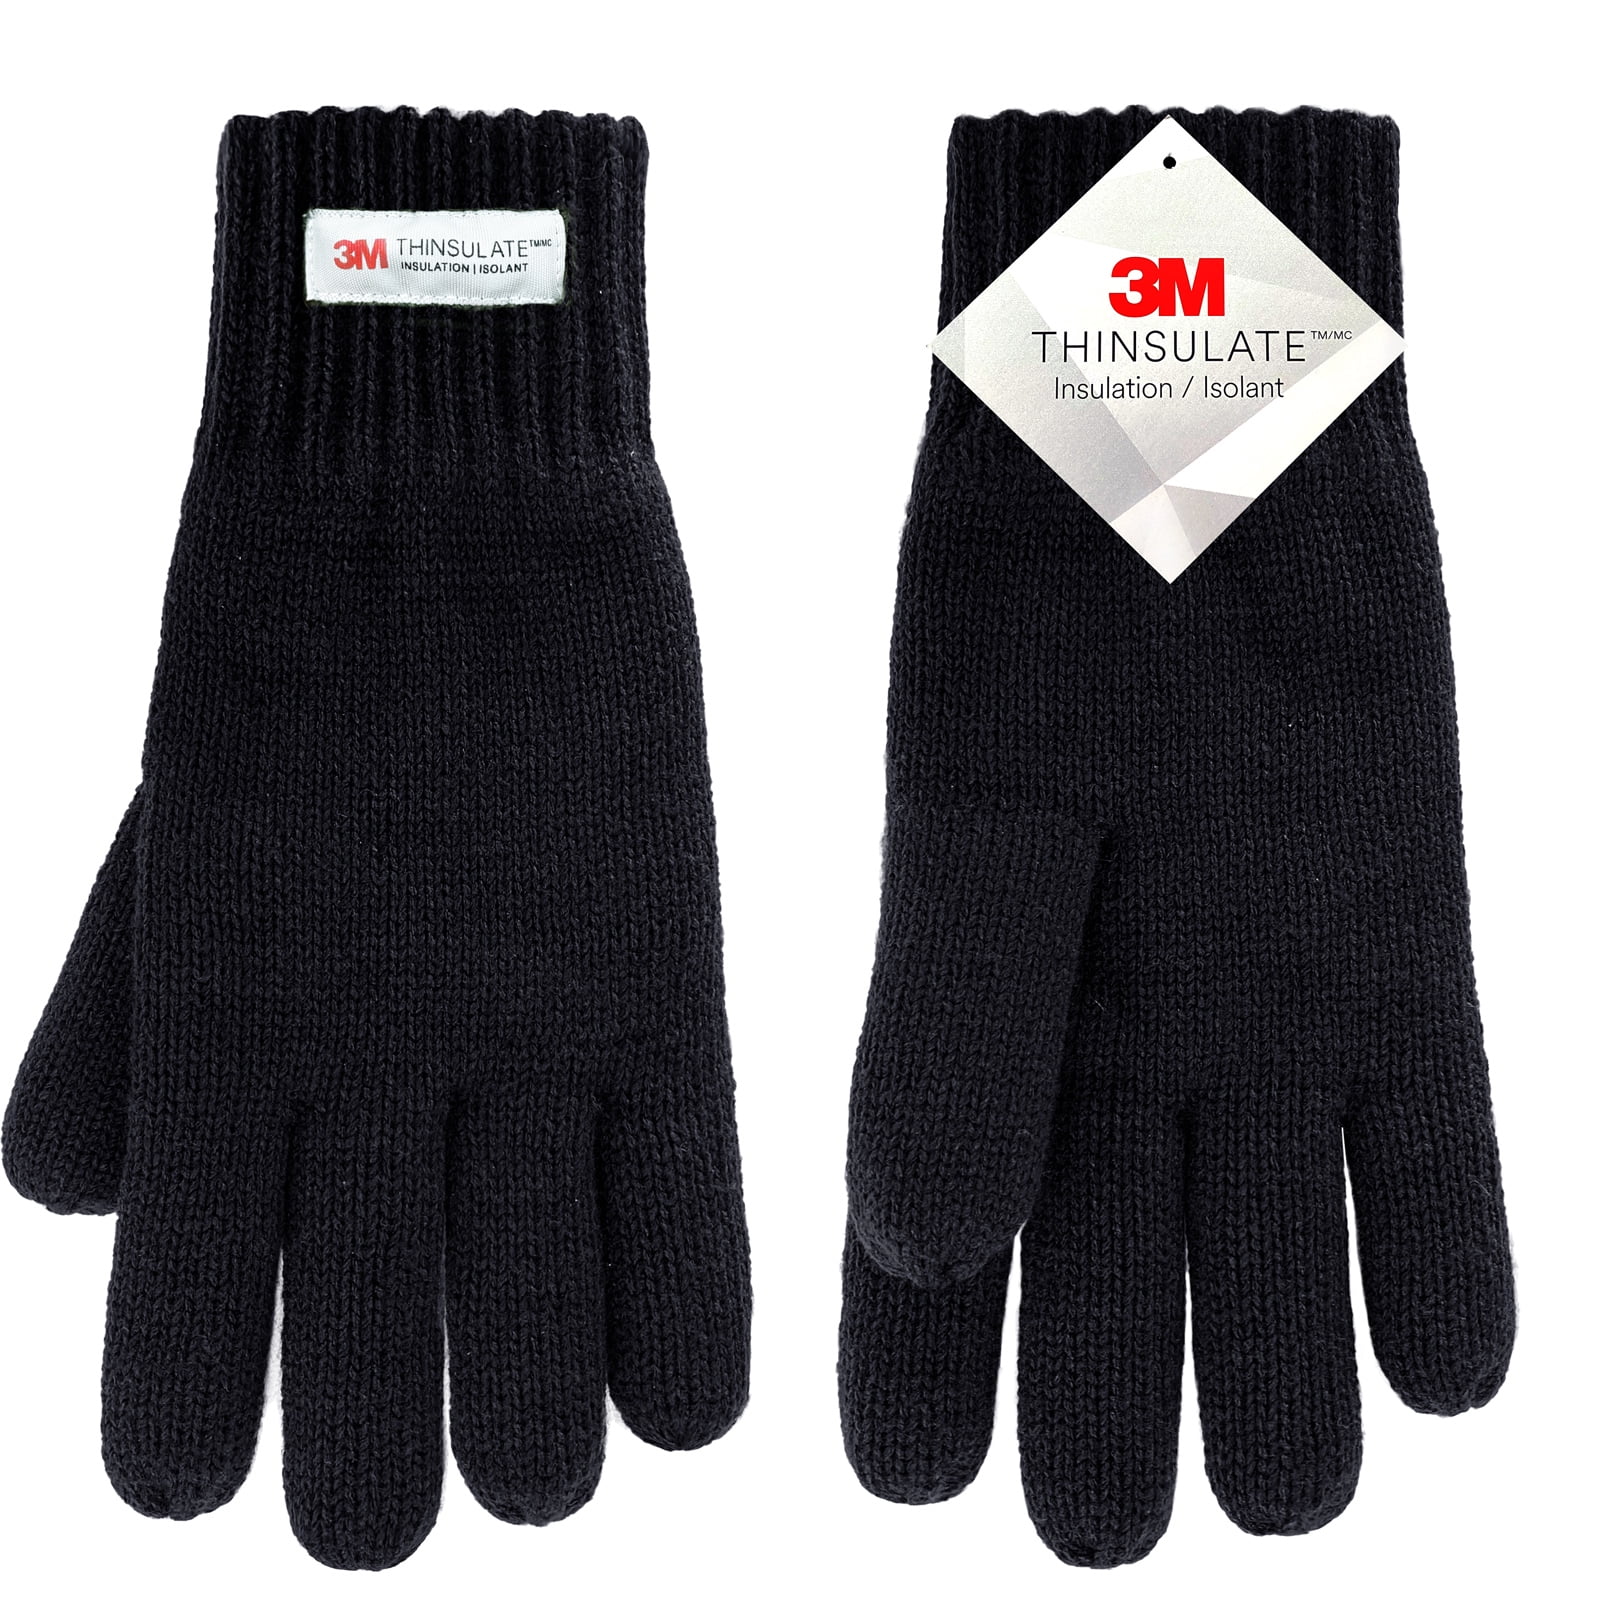 Mens Winter Wooly Thermal Thinsulate Knitted Ski Gloves Black New